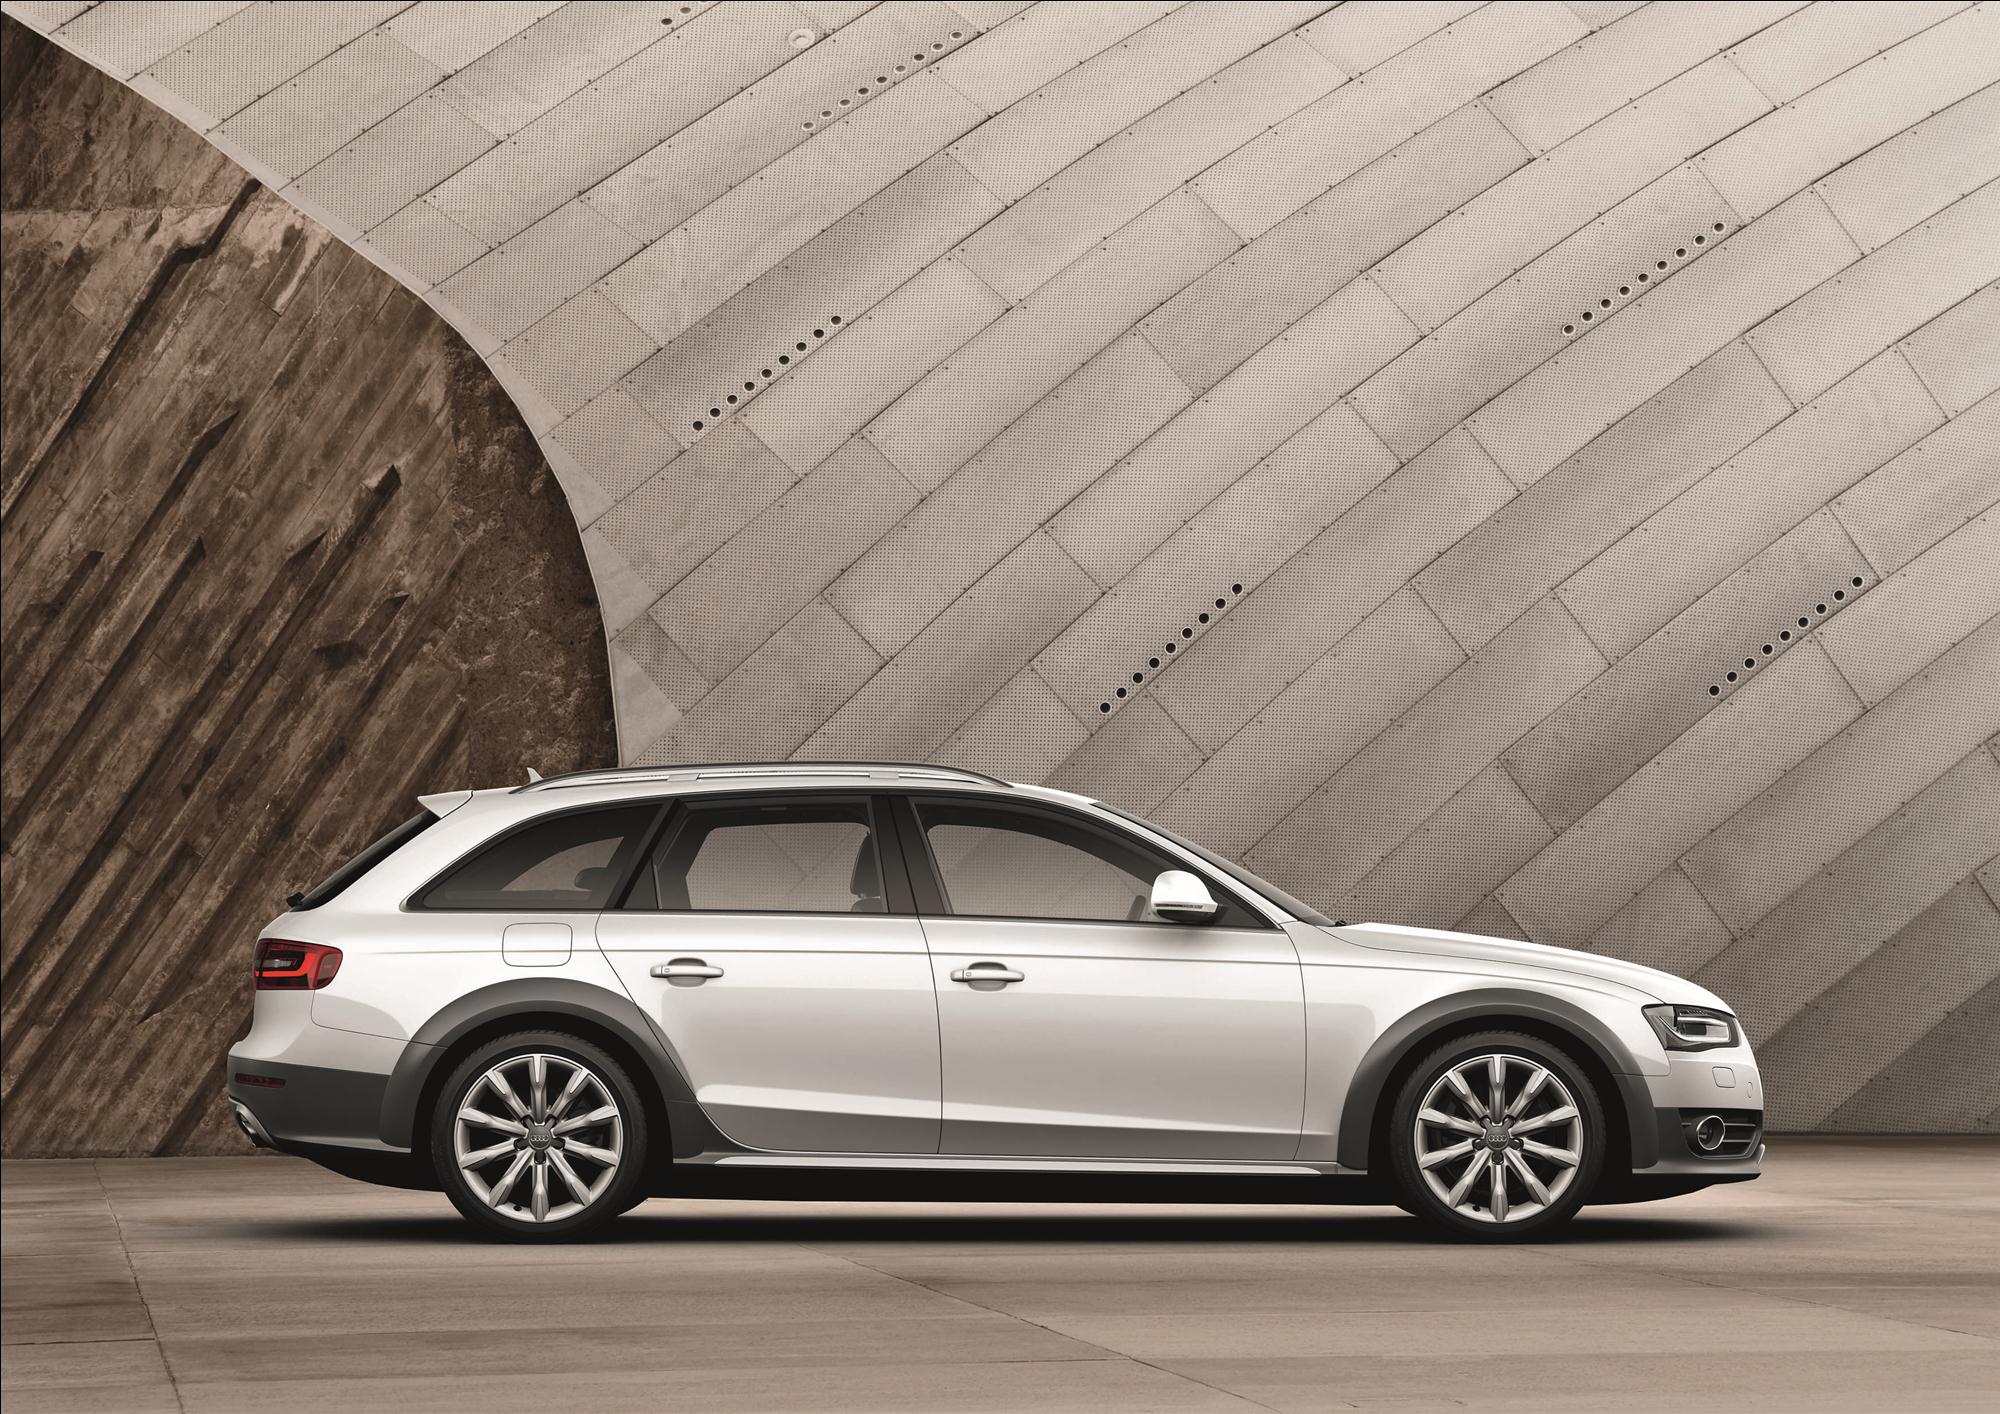 2013 Audi A4 Allroad: Coming To America At Last